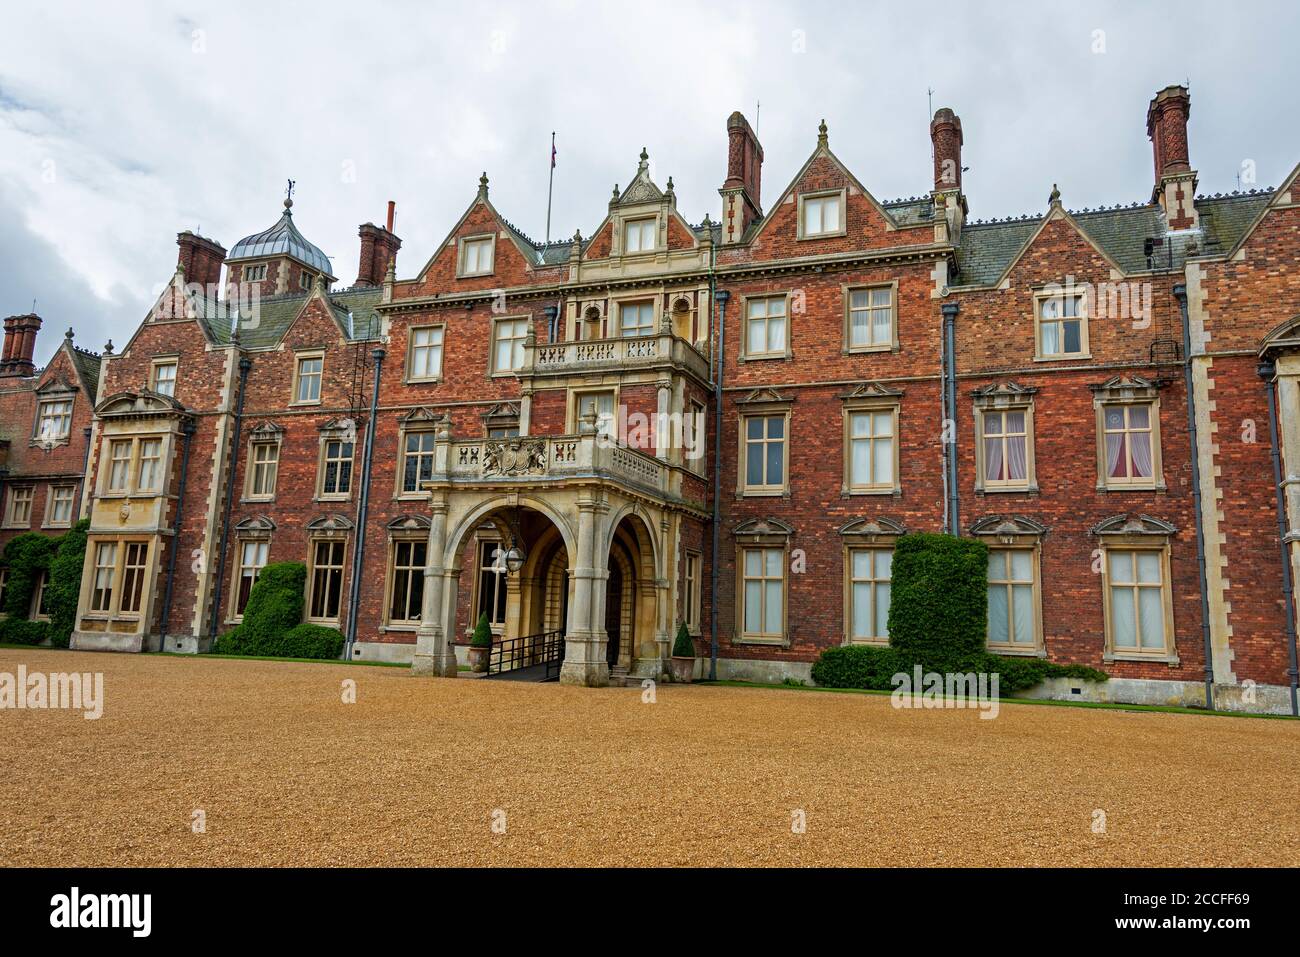 The main frontage of Sandringham House, a Grade II* listed Victorian built country house set in 20,000 acres of land near the village of Sandringham i Stock Photo